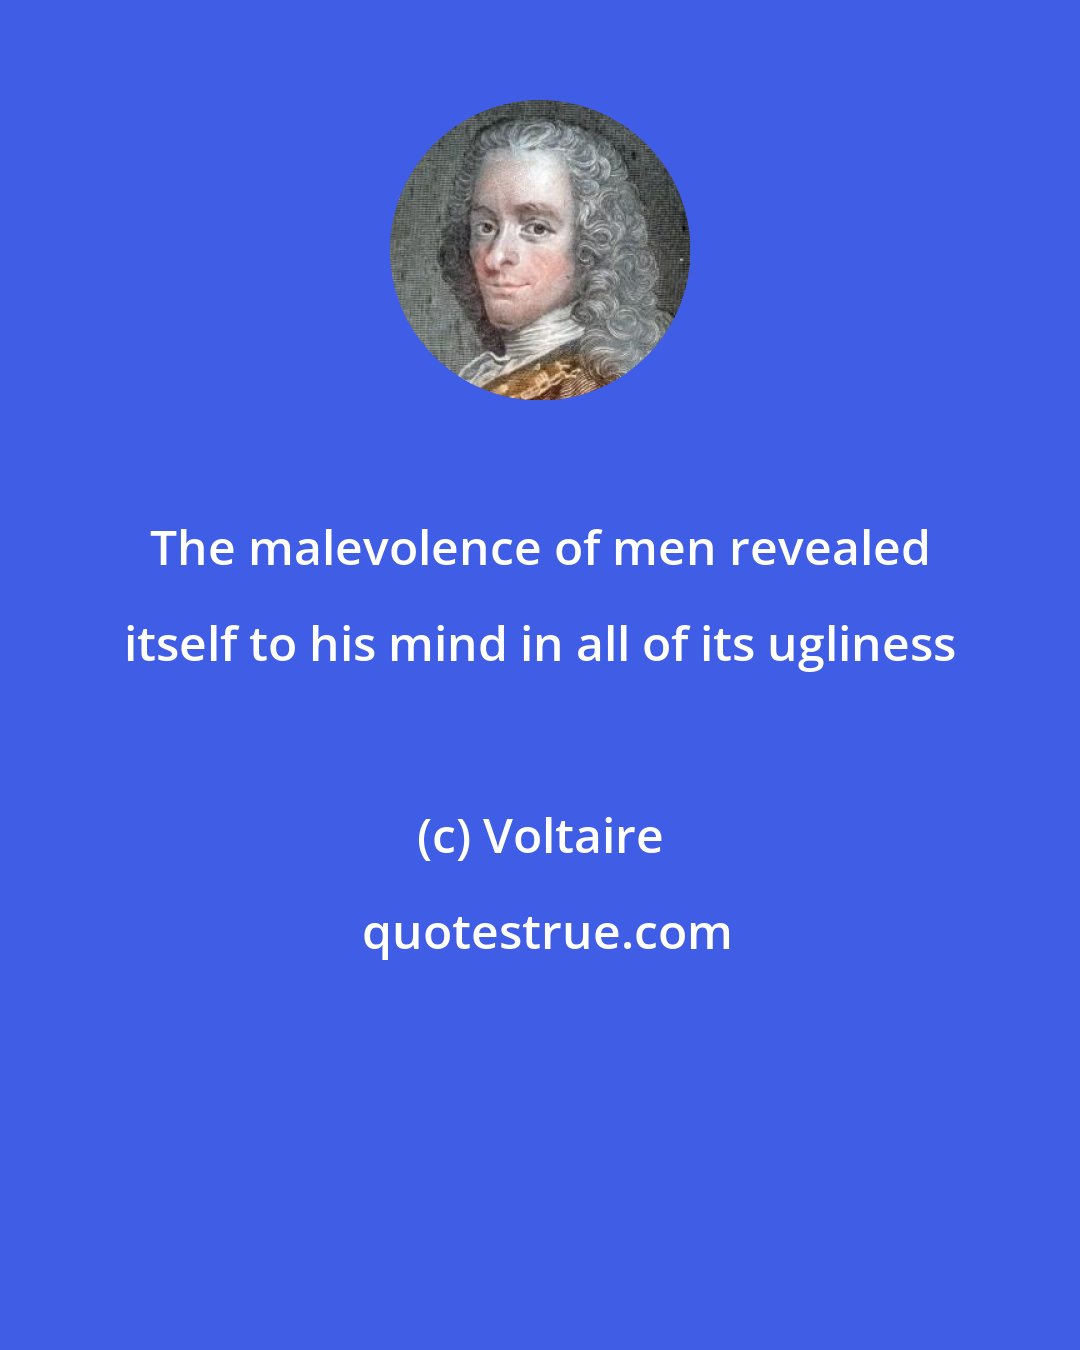 Voltaire: The malevolence of men revealed itself to his mind in all of its ugliness